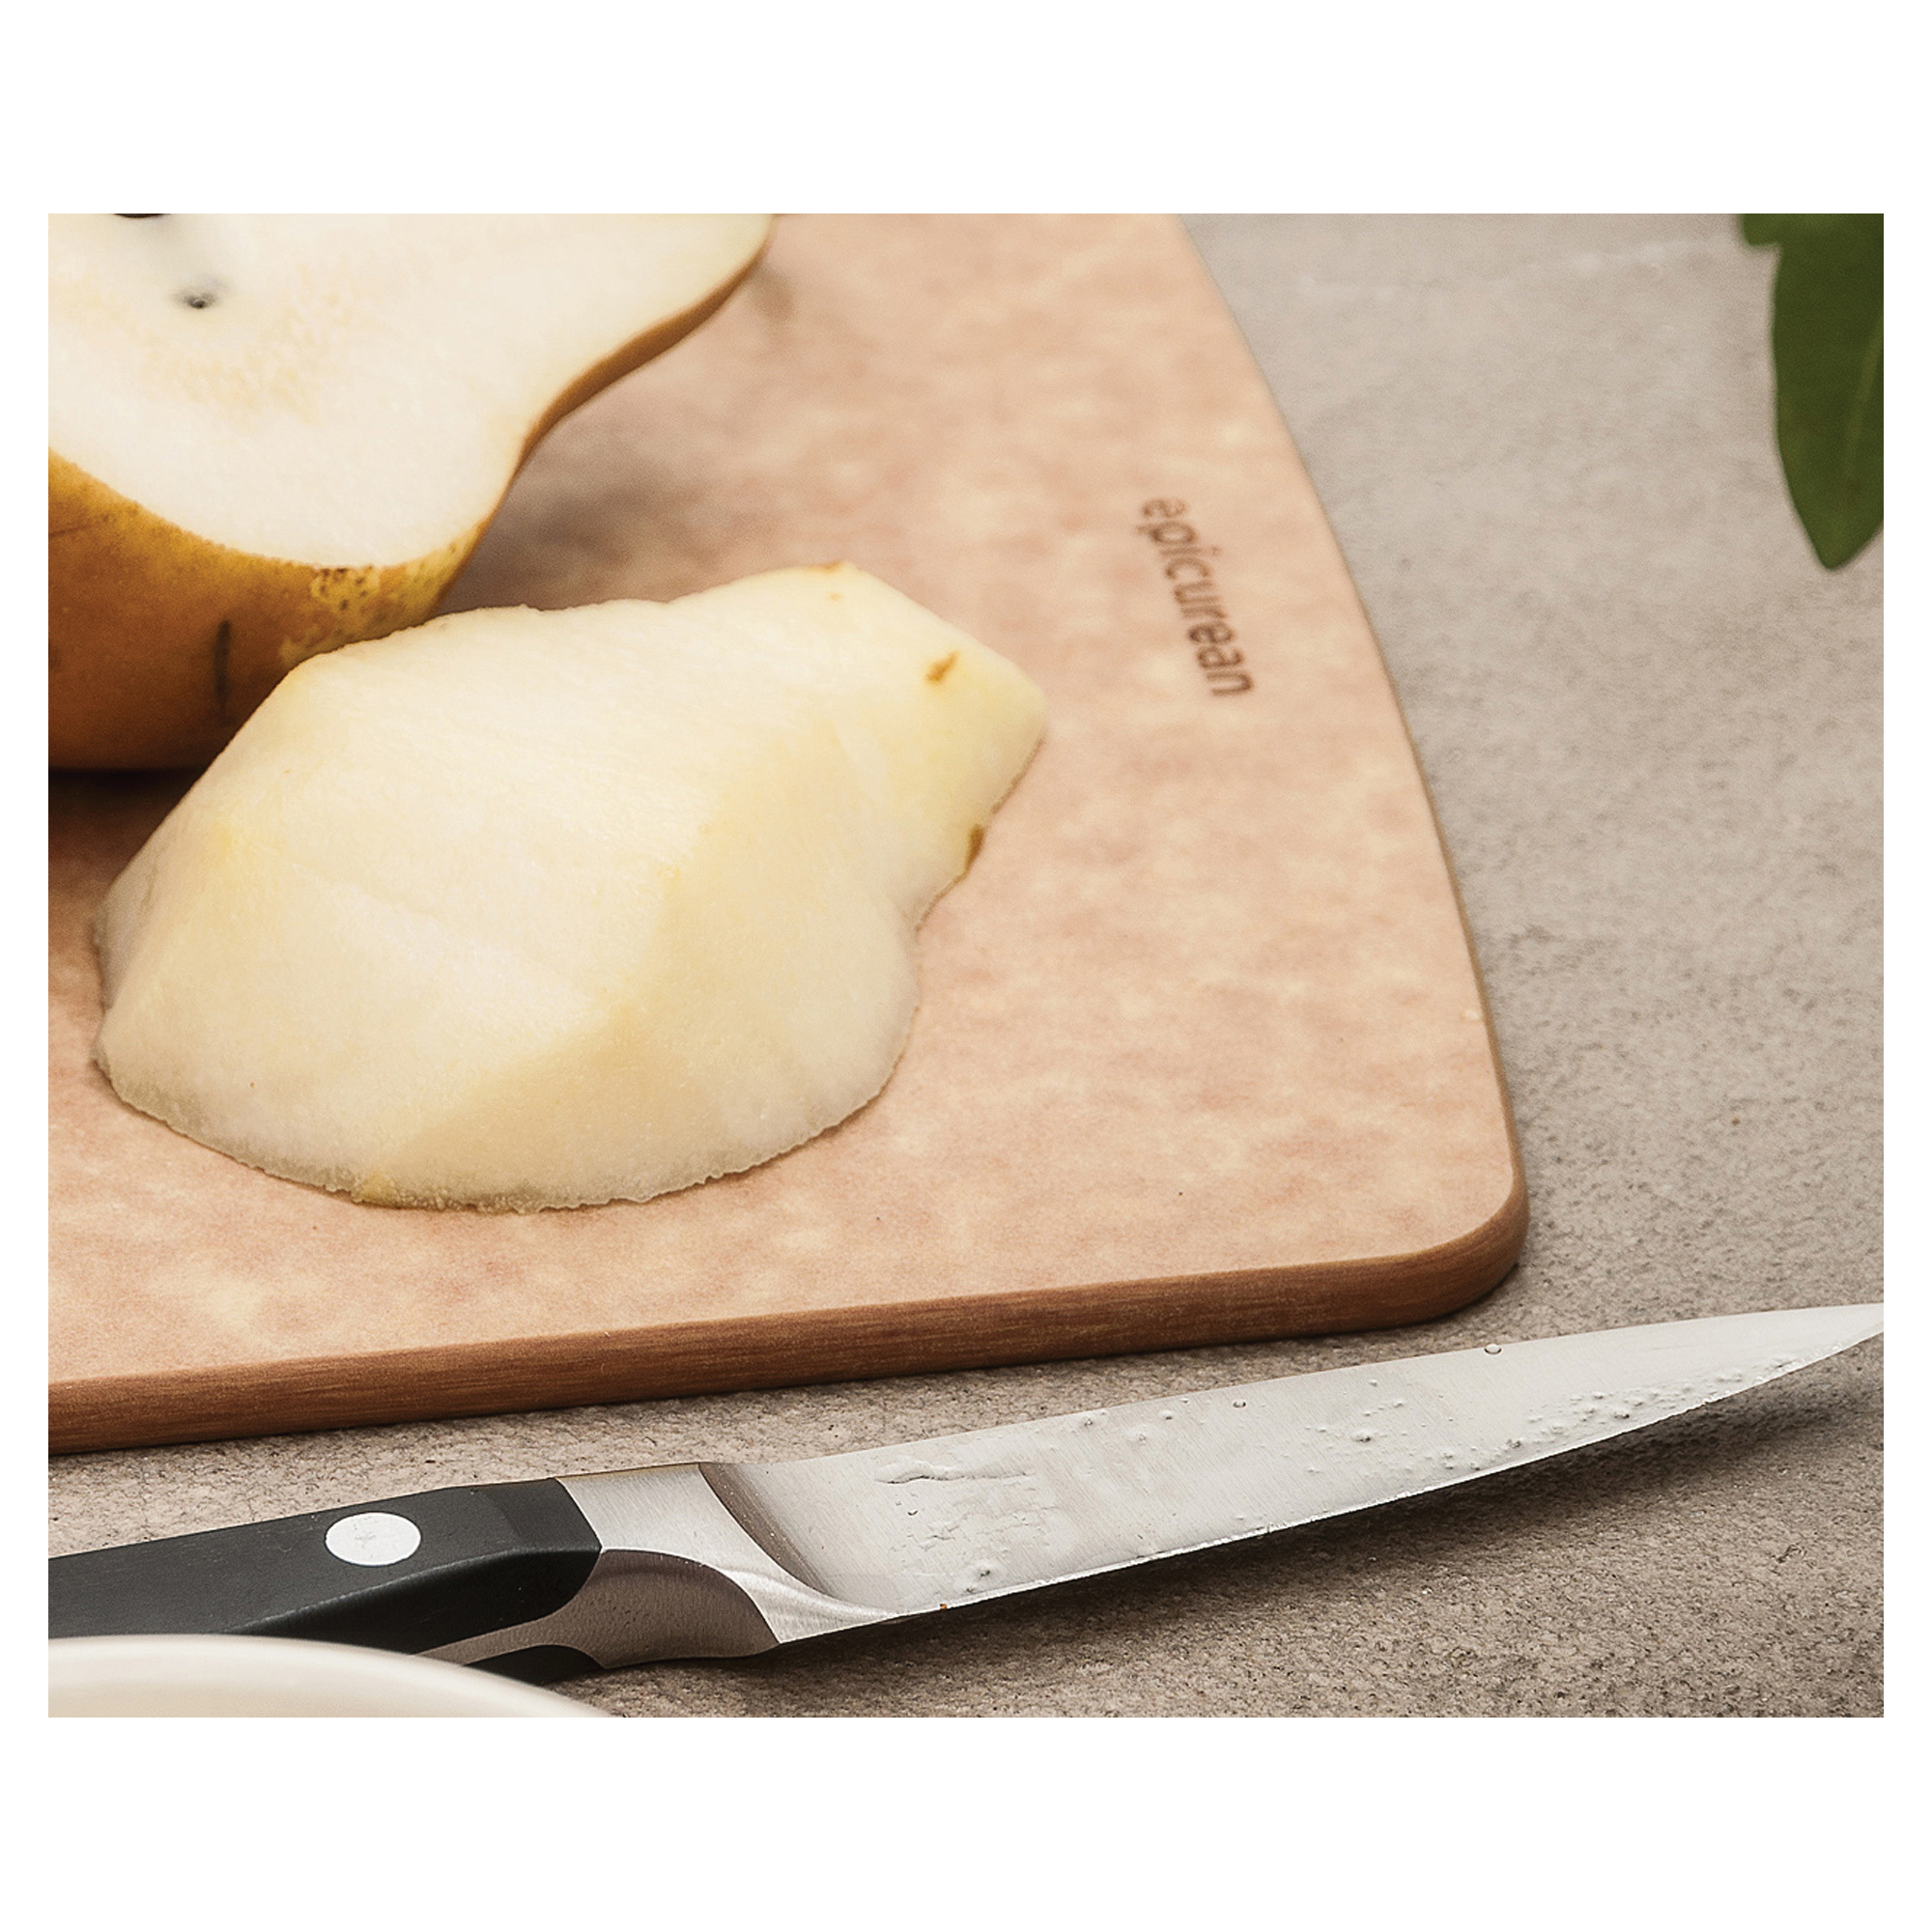 epicurean Kitchen Series 001-181301 Cutting Board, 17-1/2 in L, 13 in W, 1/4 in Thick, Wood, Natural - 3